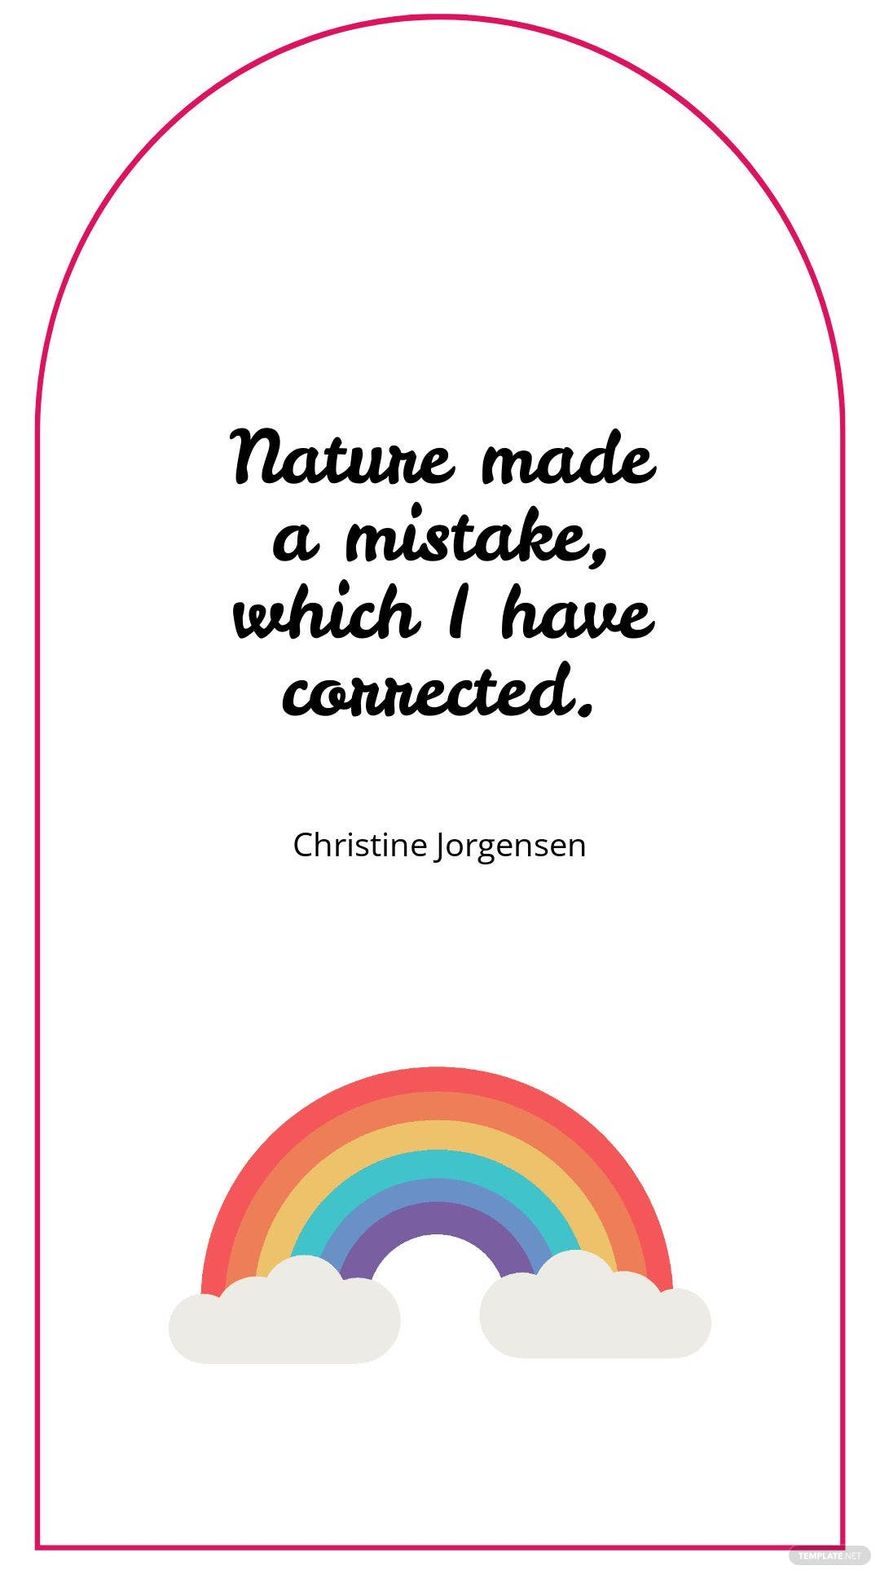 Christine Jorgensen - Nature made a mistake, which I have corrected. Template